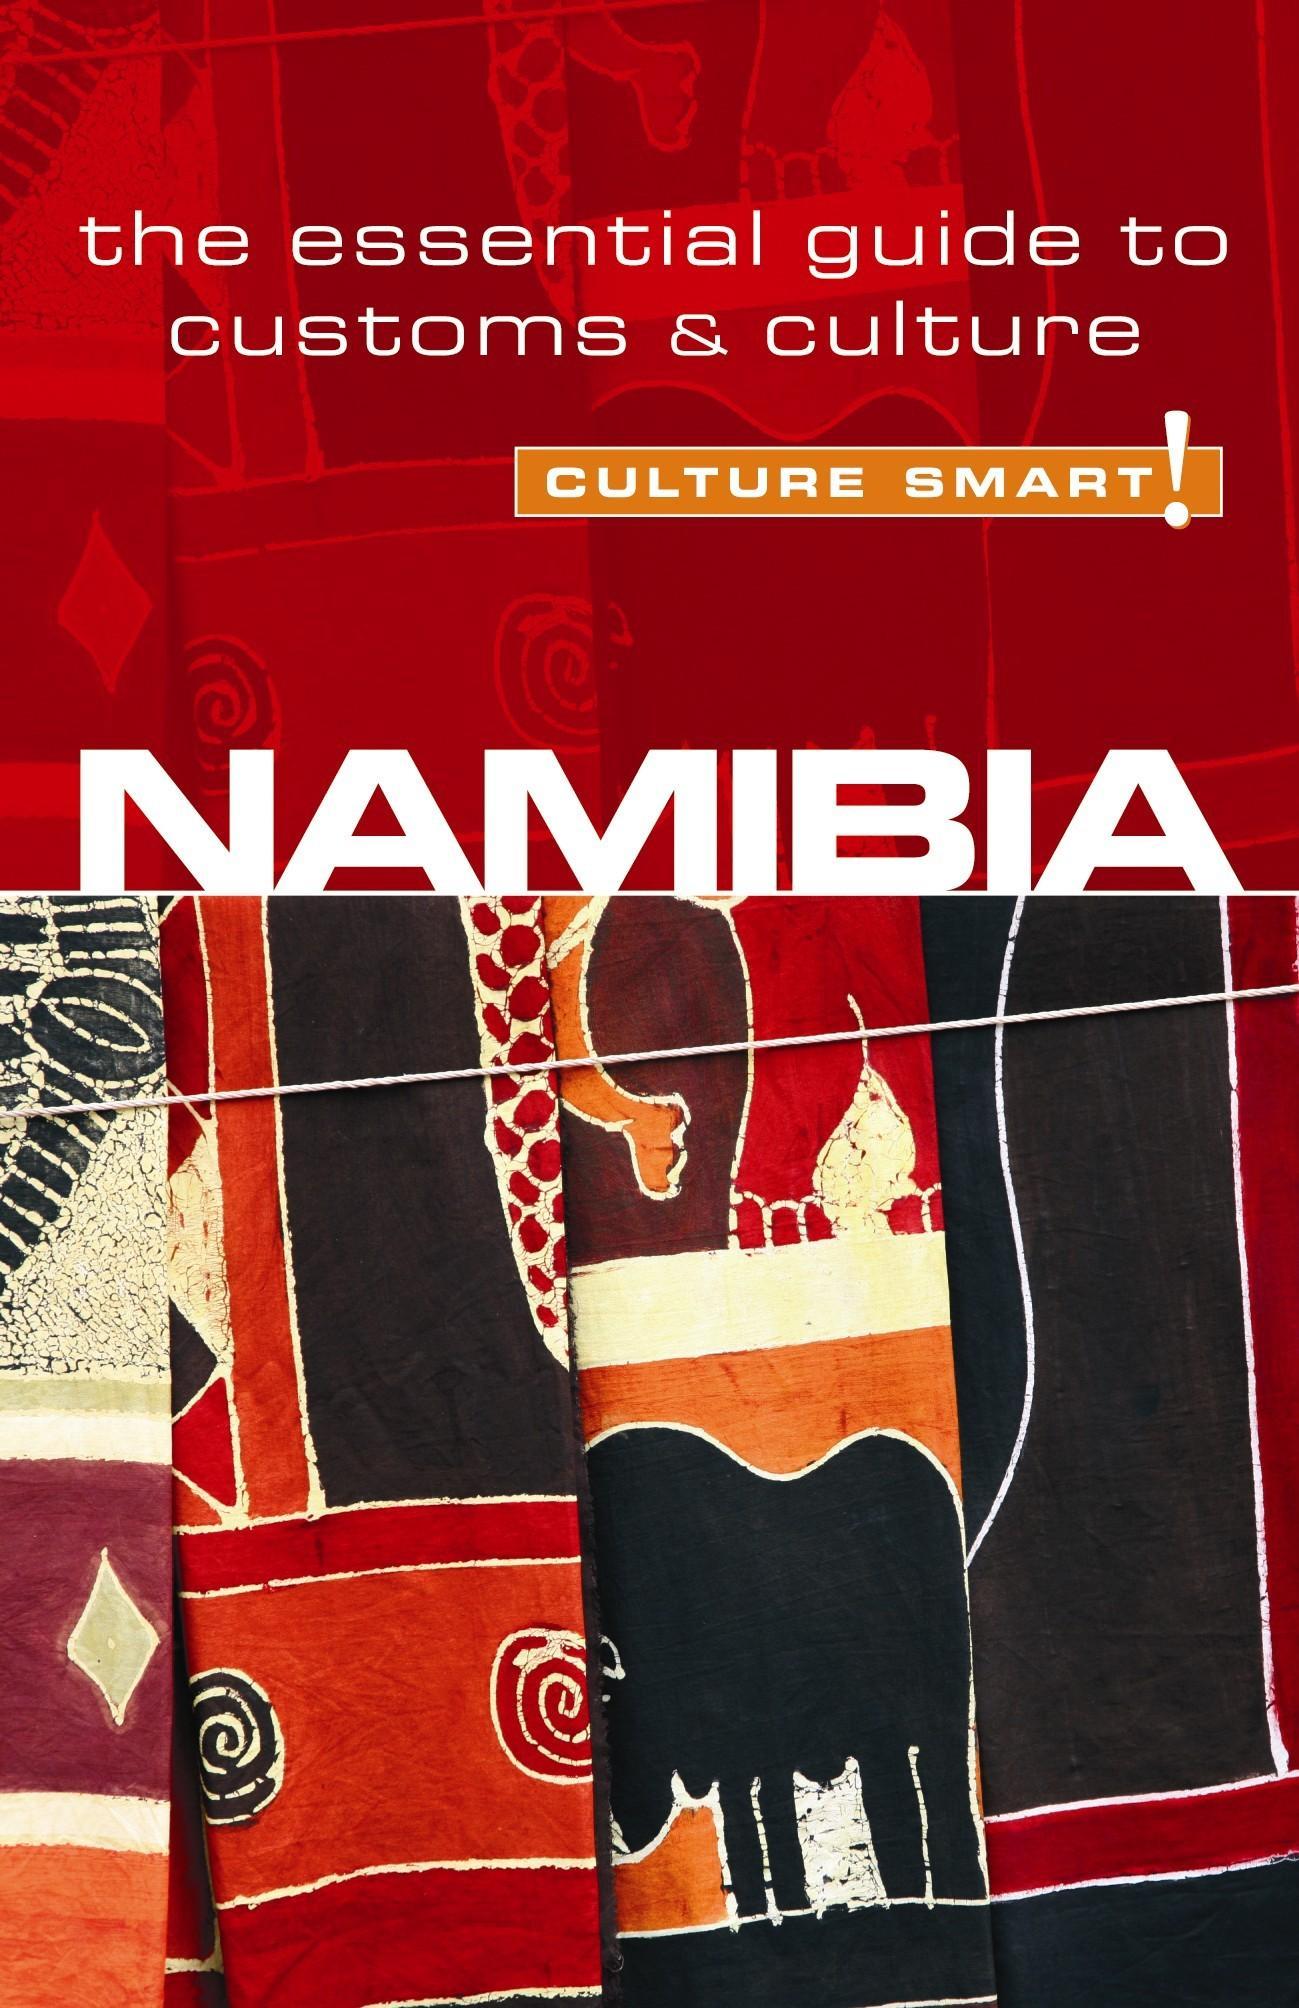 Namibia - Culture Smart! The Essential Guide to Customs & Cu - Sharri Whiting